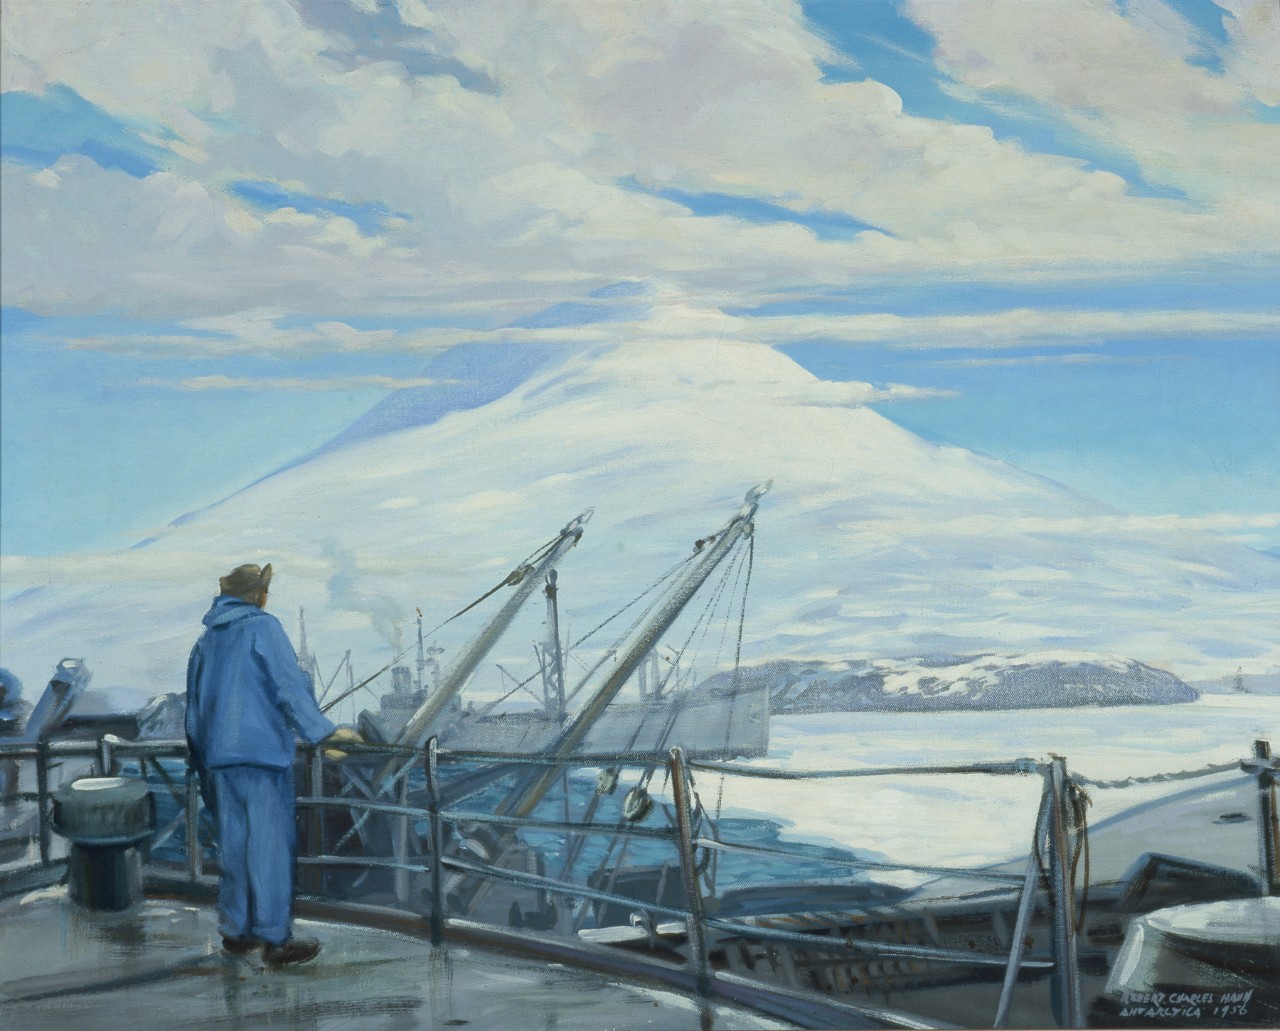 Man on the deck of a ship is looking at a mountain